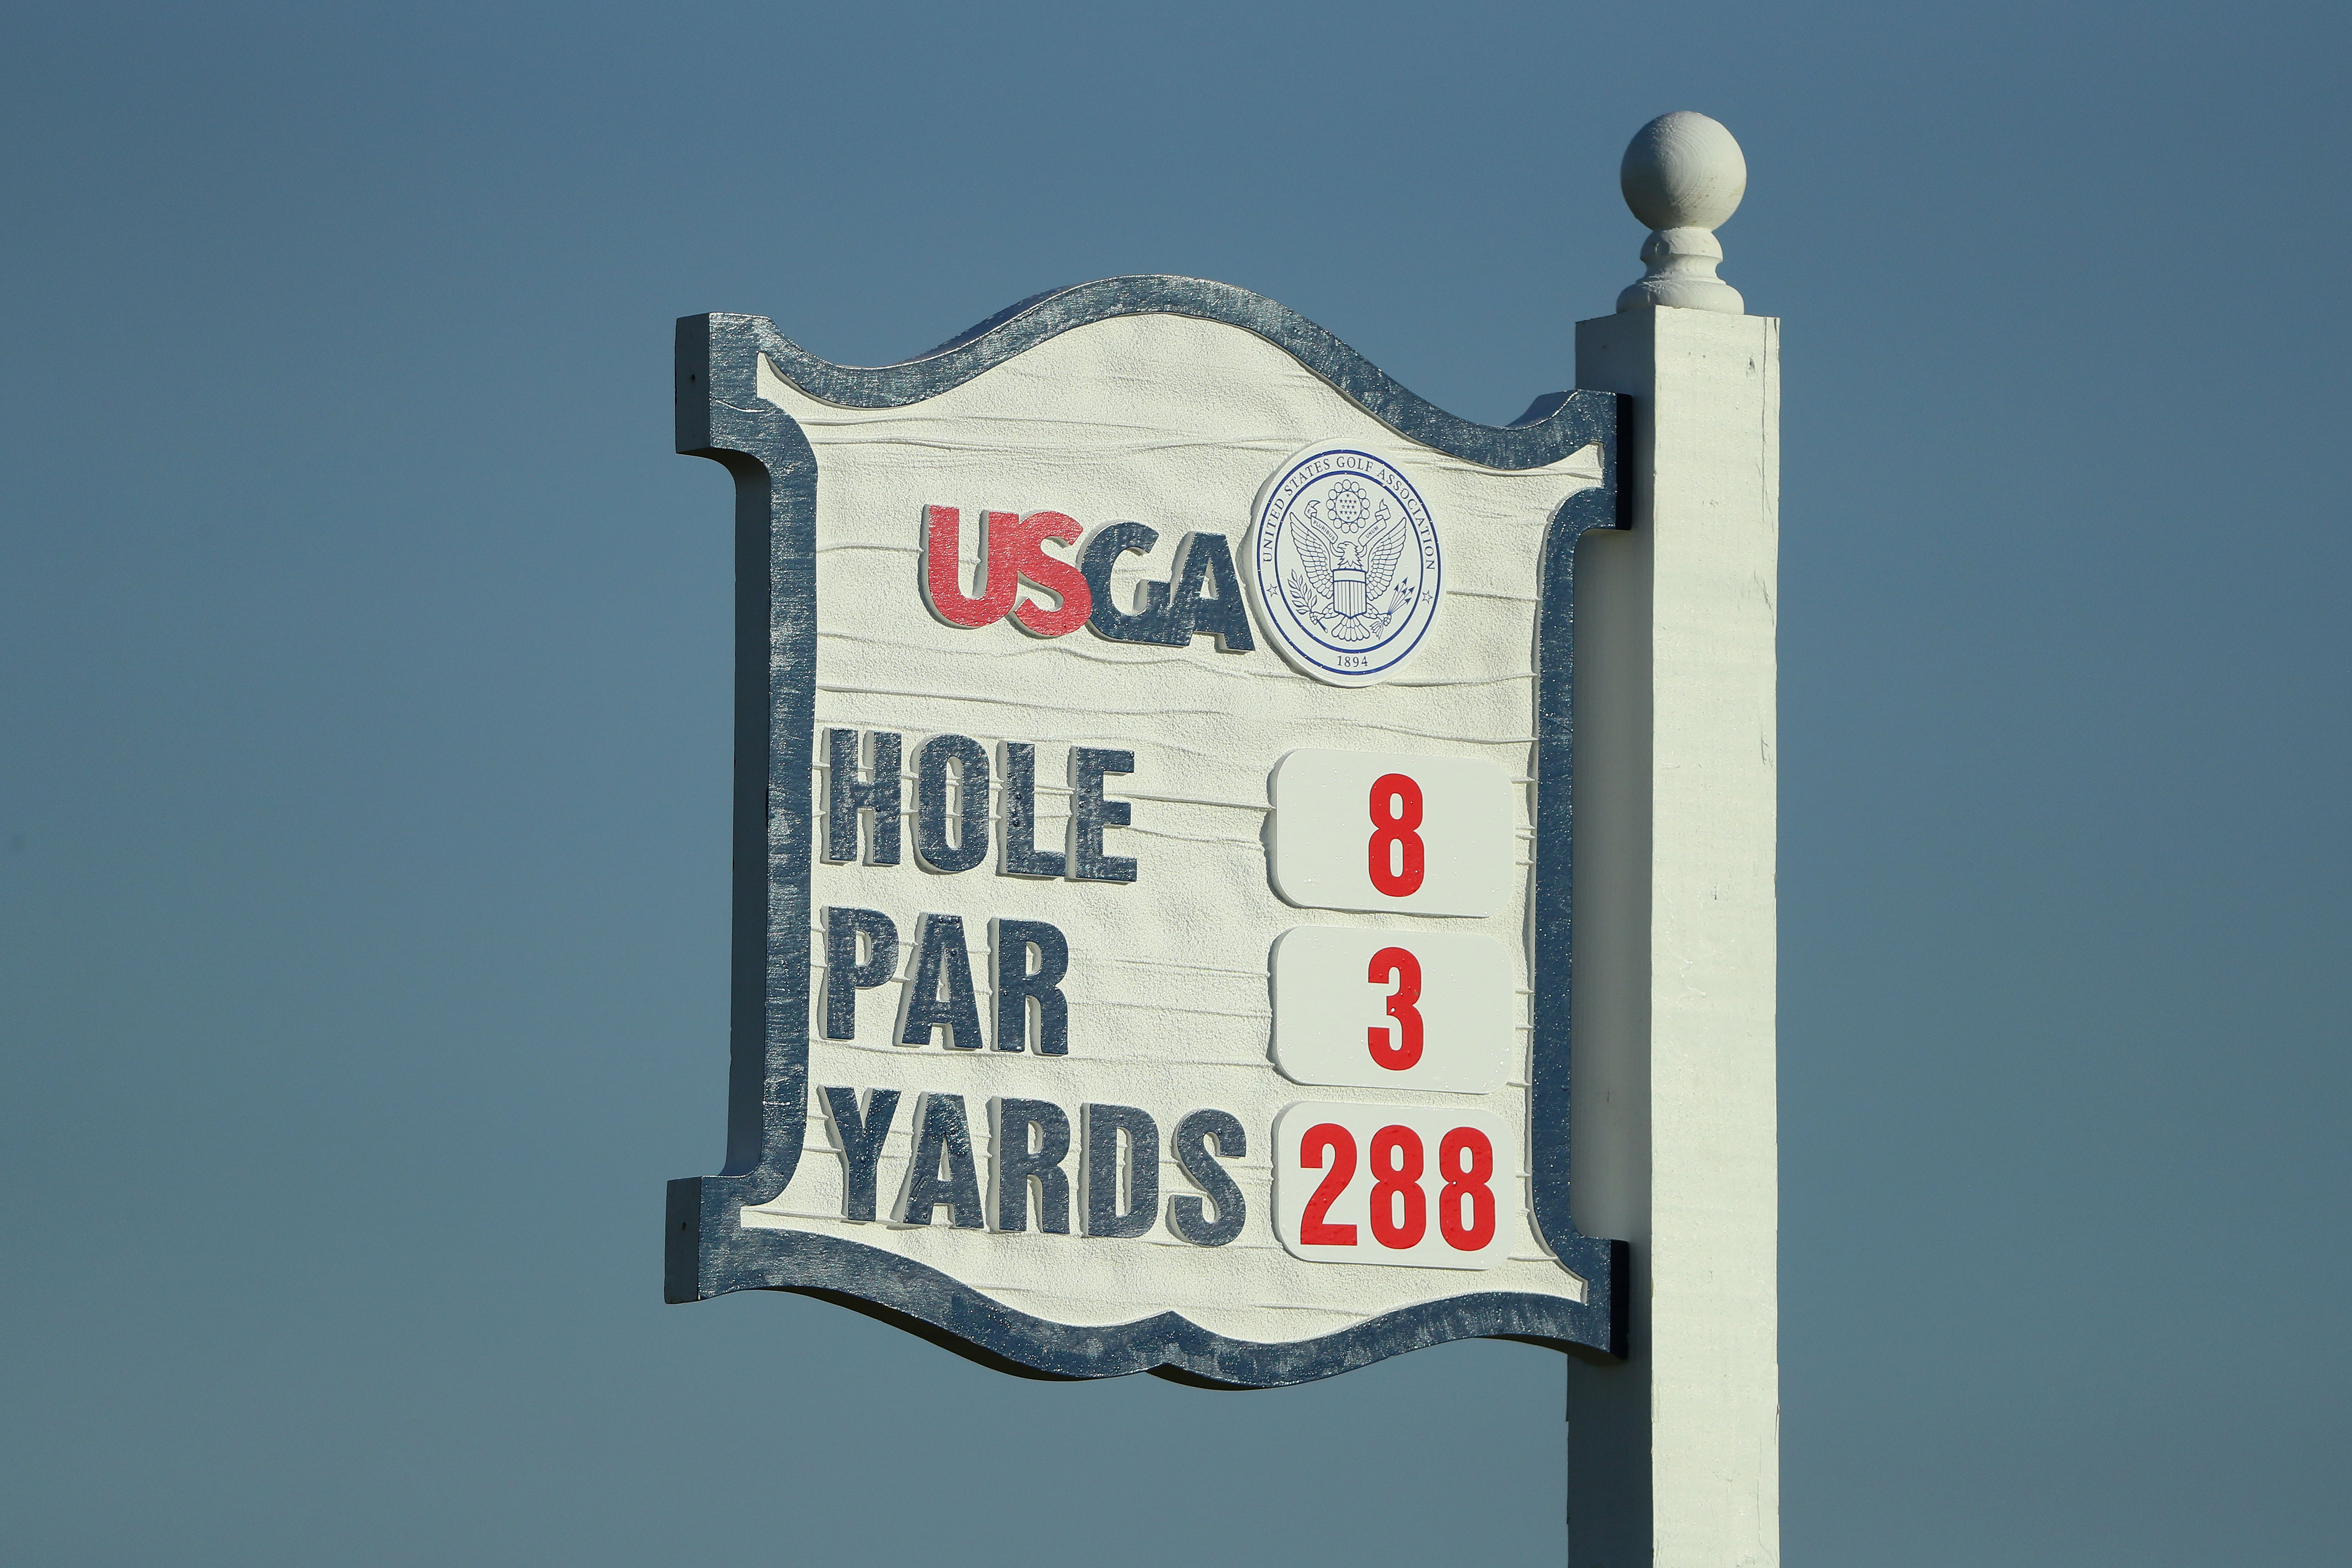 A tee sign is seen at the eighth hole during the second round of the U.S. Open at Oakmont. (Andrew Redington/Getty Images)